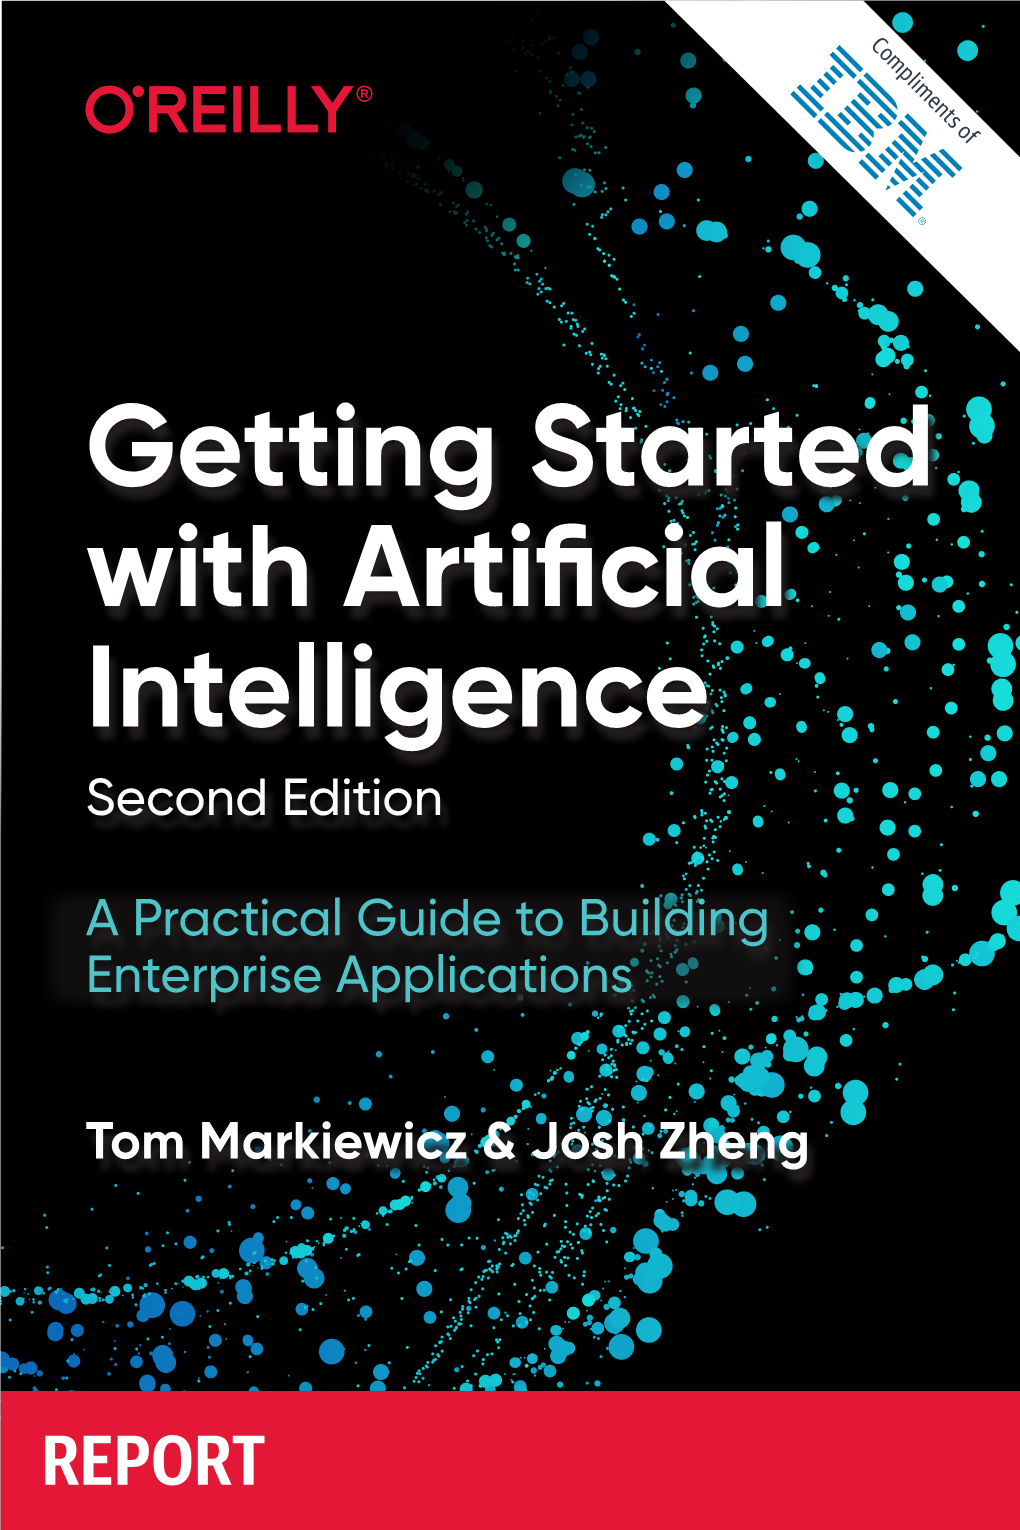 Getting Started with Artificial Intelligence Second Edition